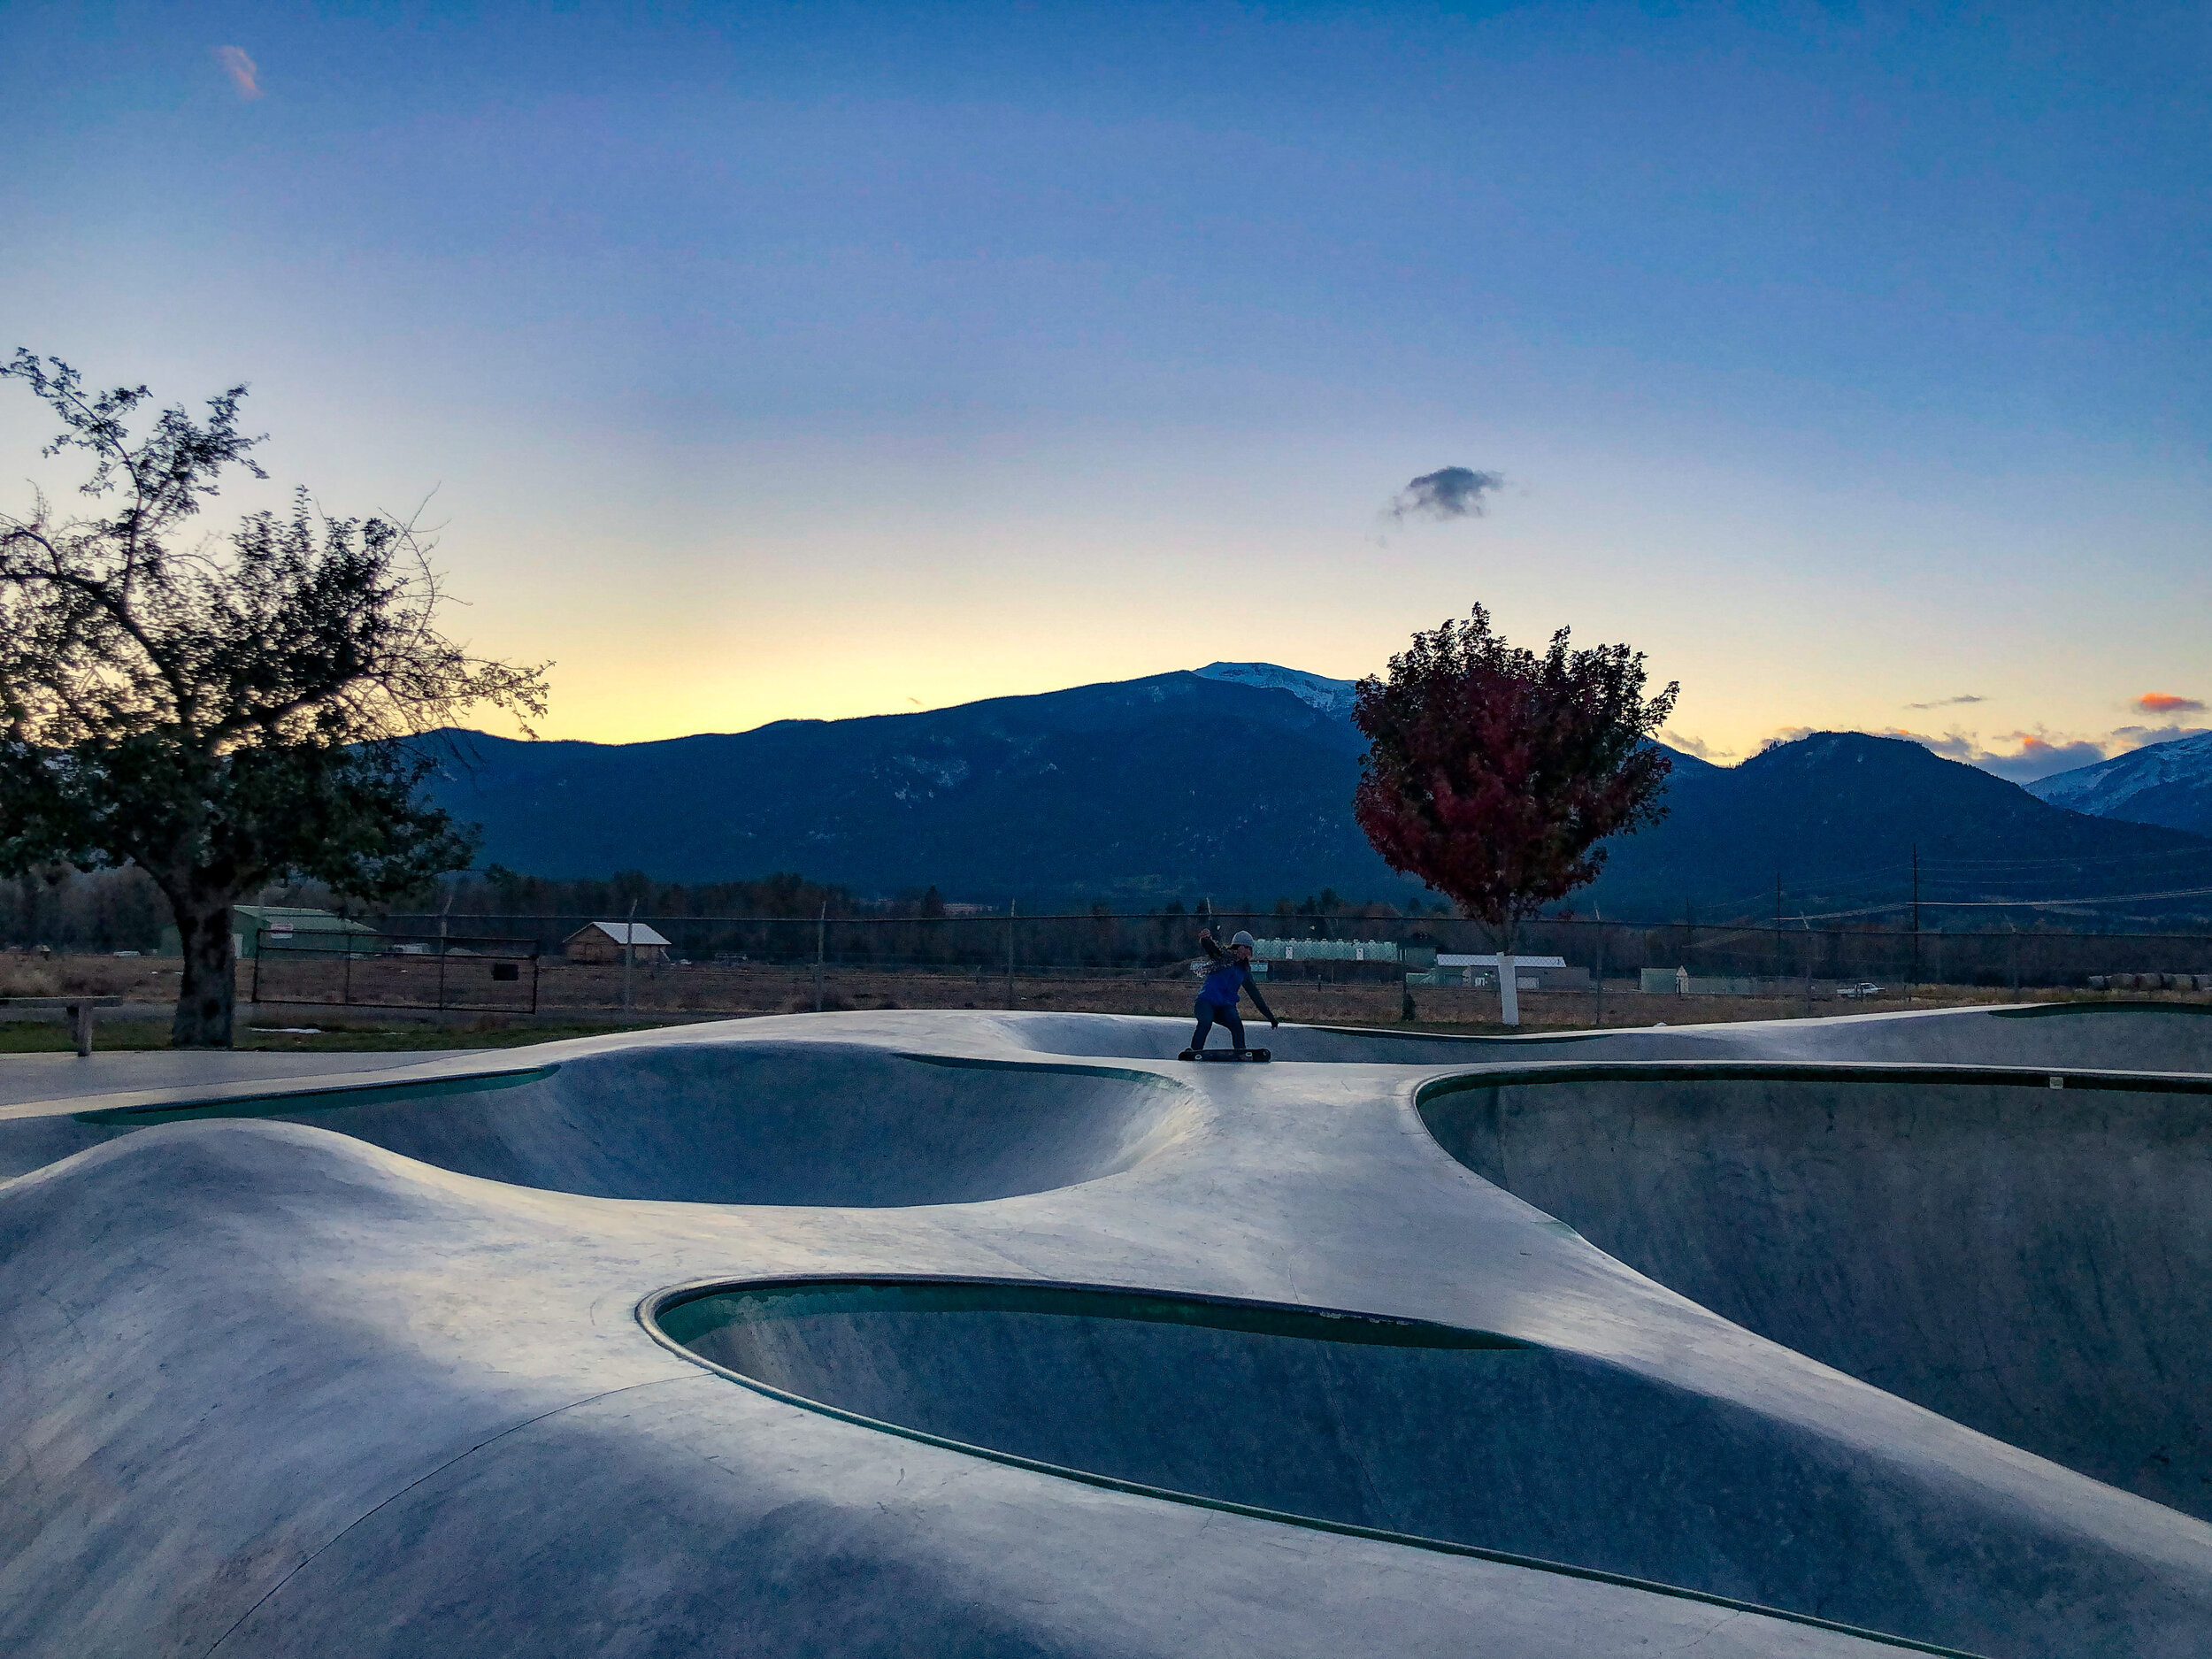 There’s nothing like golden hour skating in the #bitterrootvalley 🌄